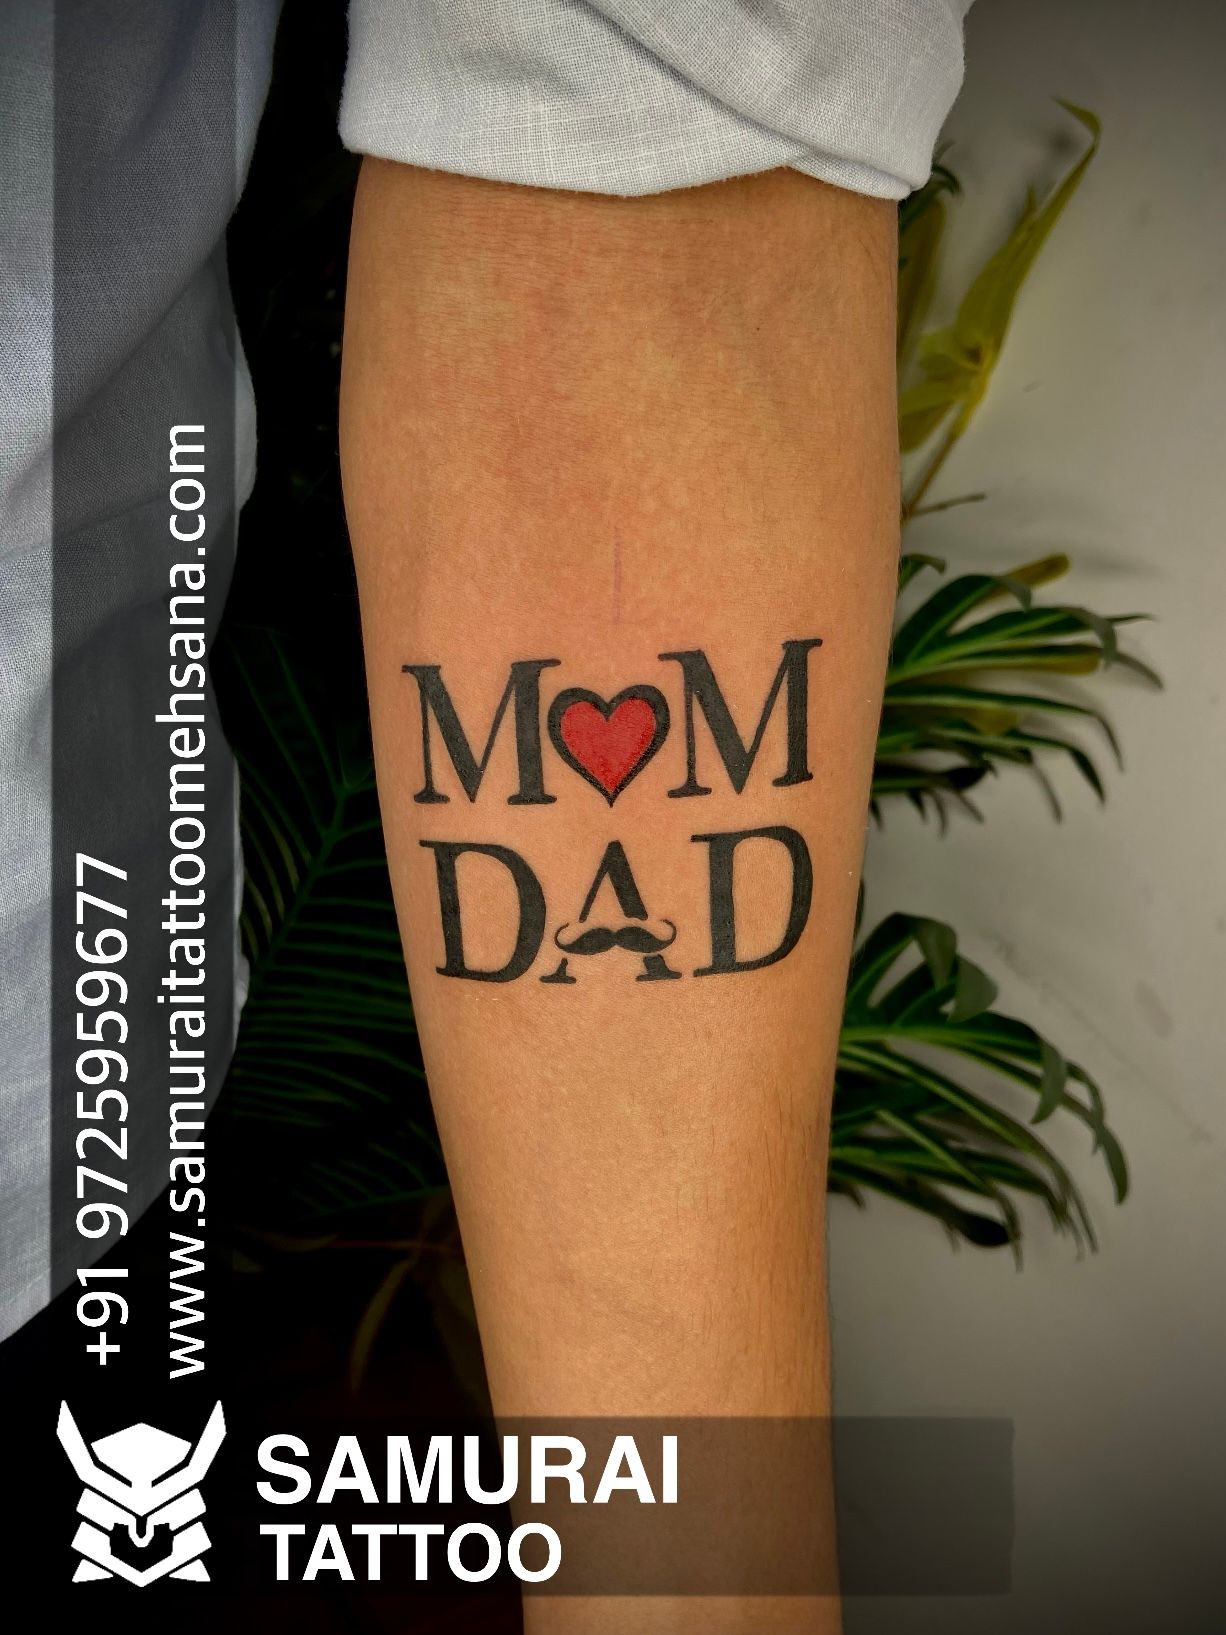 Dad Gets Tattoo of Daughter's Heart Surgery Zipper Scar - TODAY